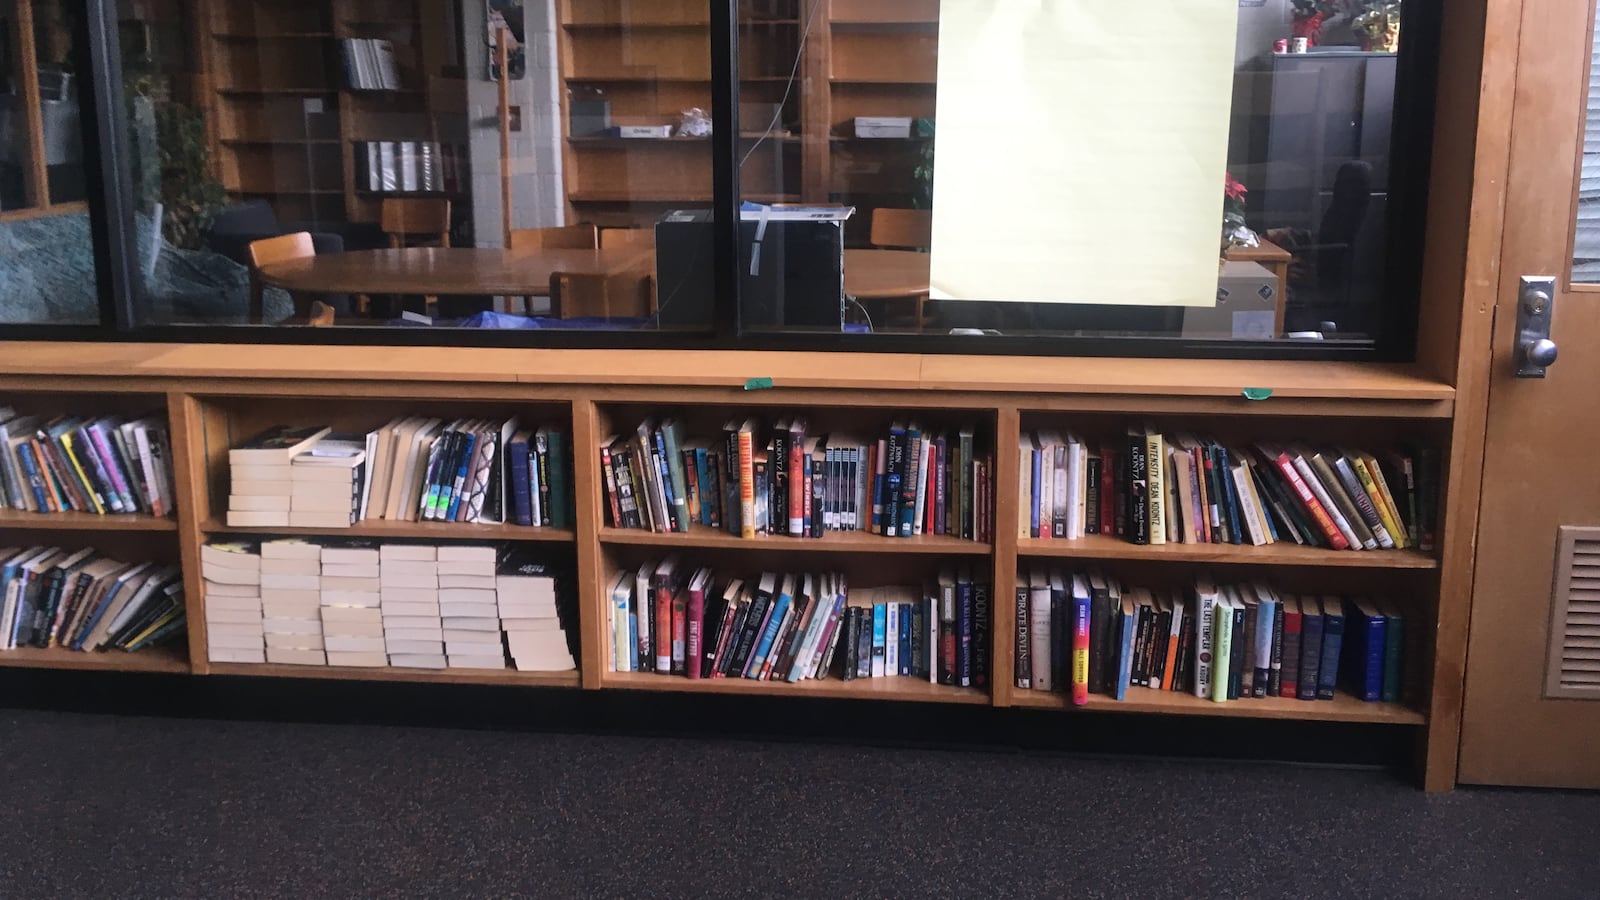 The library at Osborn High School lacks a librarian, like many schools statewide.